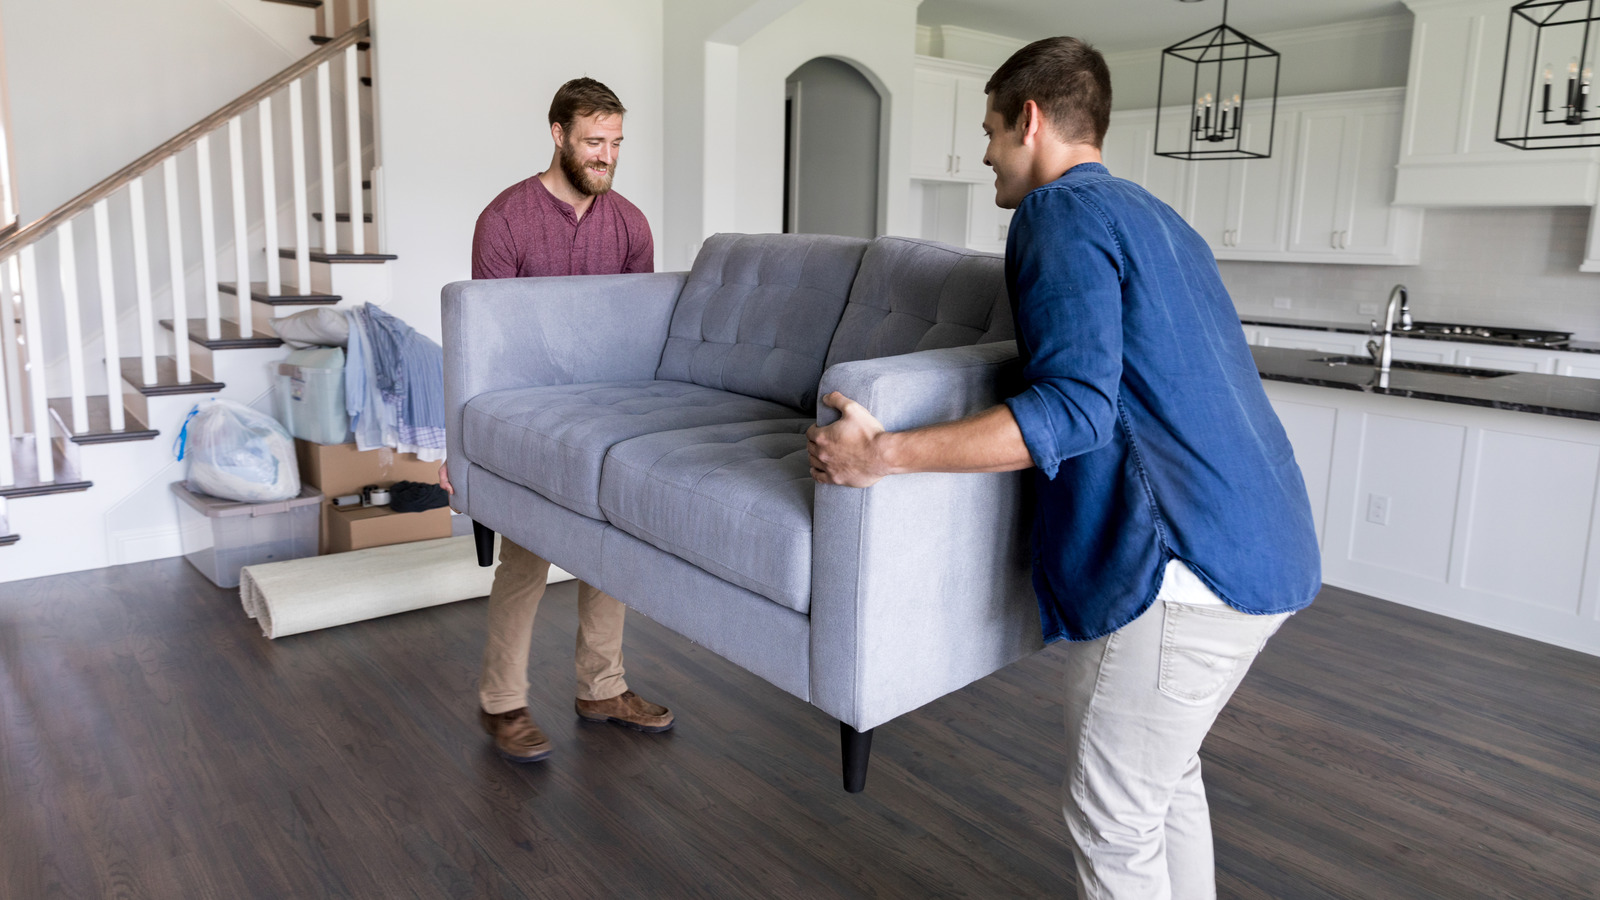 Why is our furniture shrinking?